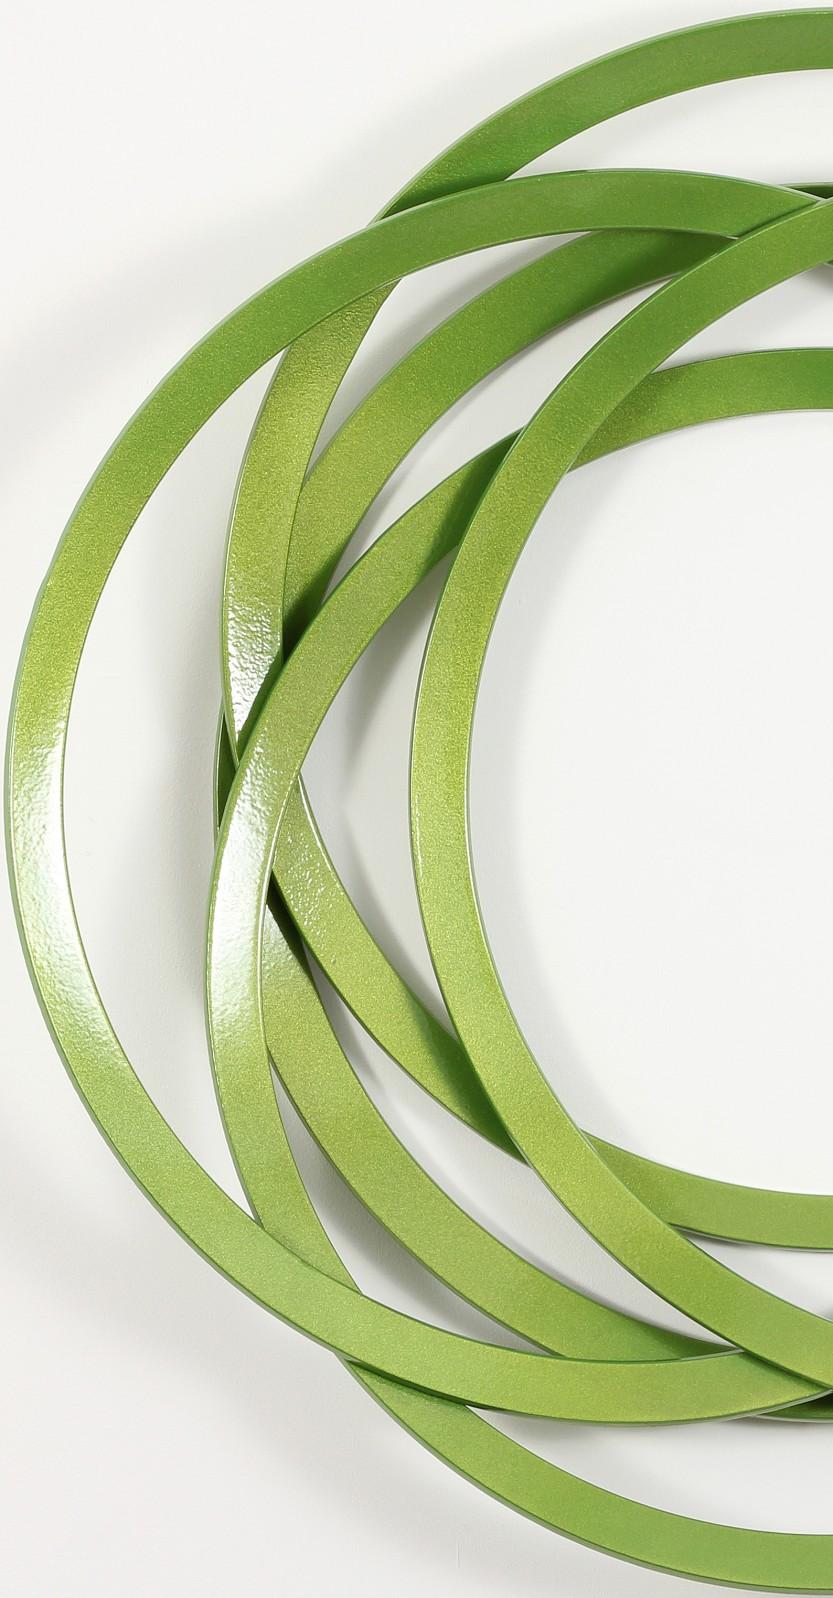 Slender rings of flattened steel powder coated in an eye-popping apple green are stacked to create an elegant yet playful geometric wreath. Known for his intricate and contemplative wall mounted works, master Canadian sculptor Shayne Dark intersects